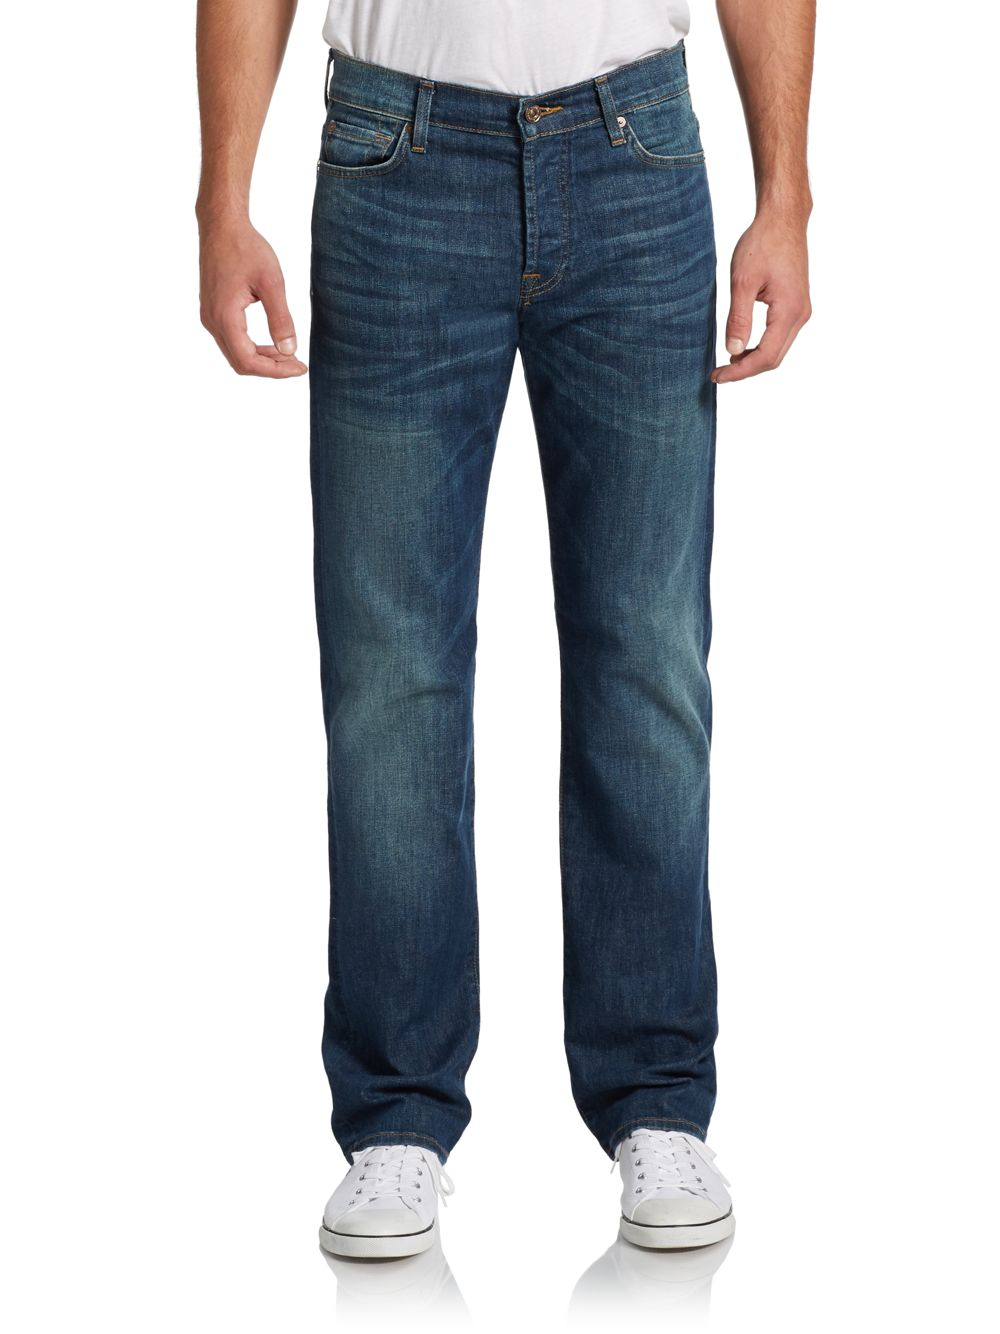 Shah Decent Substantial button fly jeans mens mainly Shabby Derive